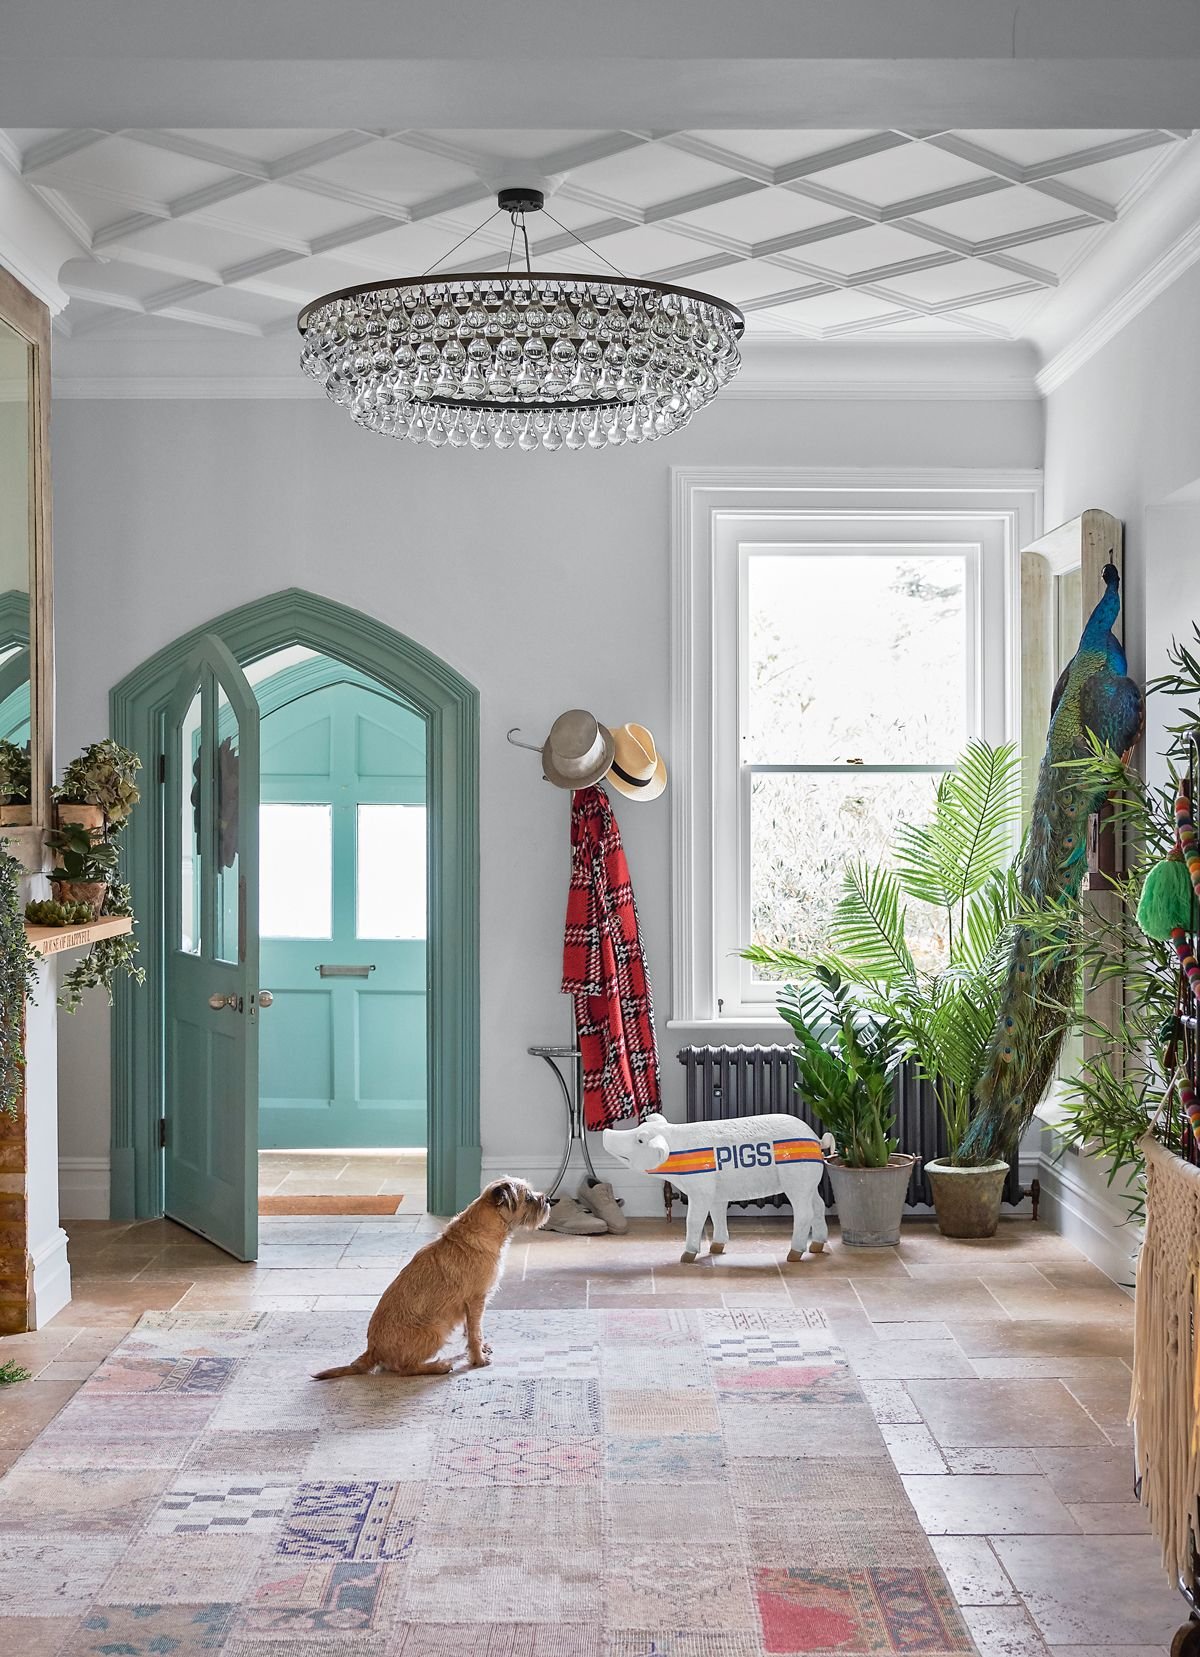 This detached Victorian house in London boasts more than a splash of fun – thanks to its owner, a big name in eclectic homeware